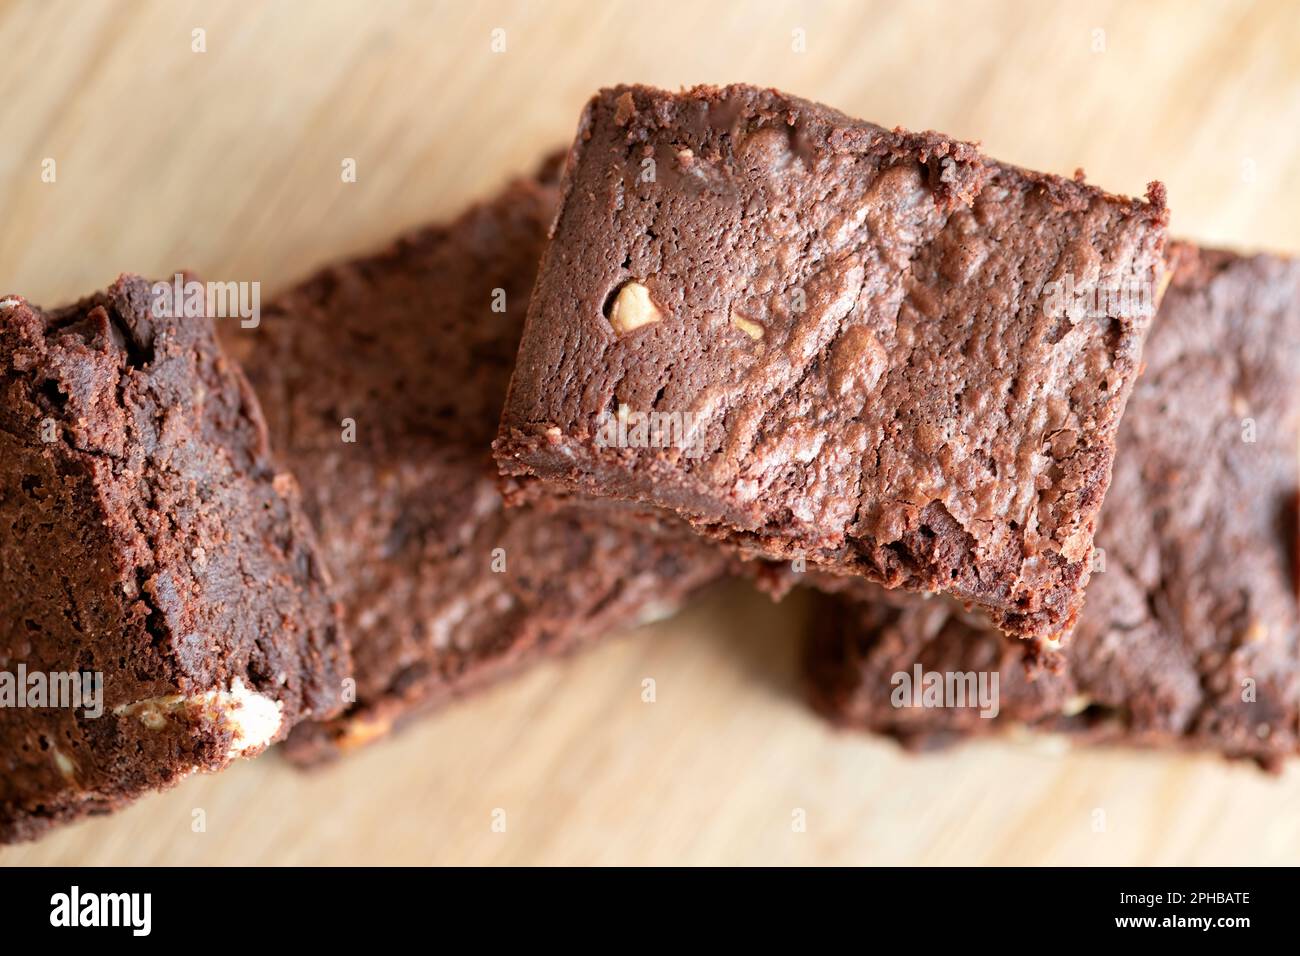 A batch of freshly home baked triple chocolate brownies arranged on a wooden platter. The brownies are still warm and gooey. an indulgent treat Stock Photo